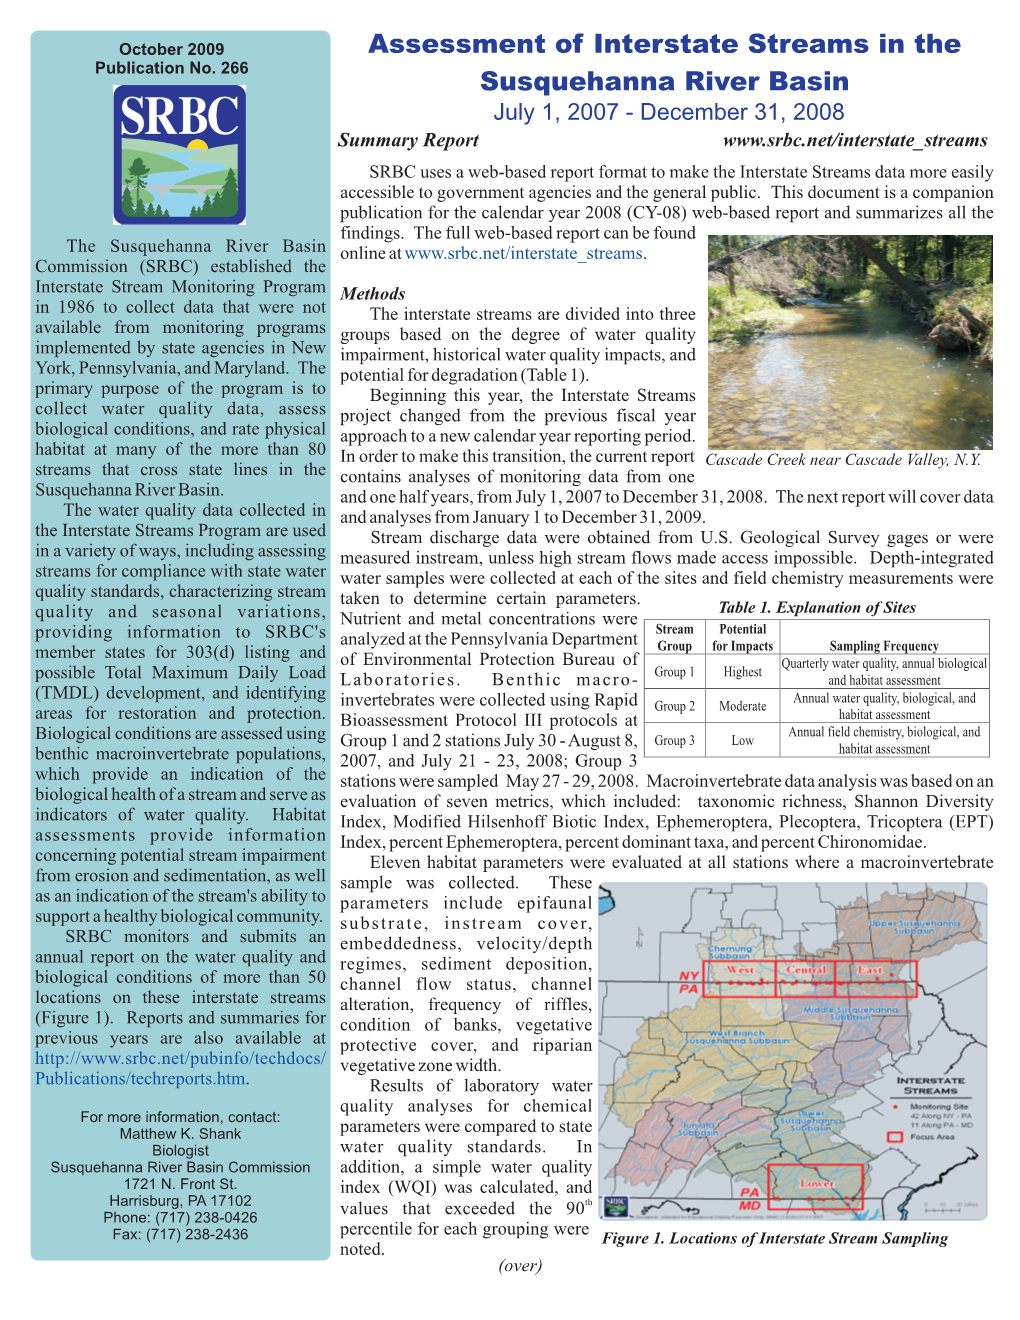 Assessment of Interstate Streams in the Susquehanna River Basin 2008